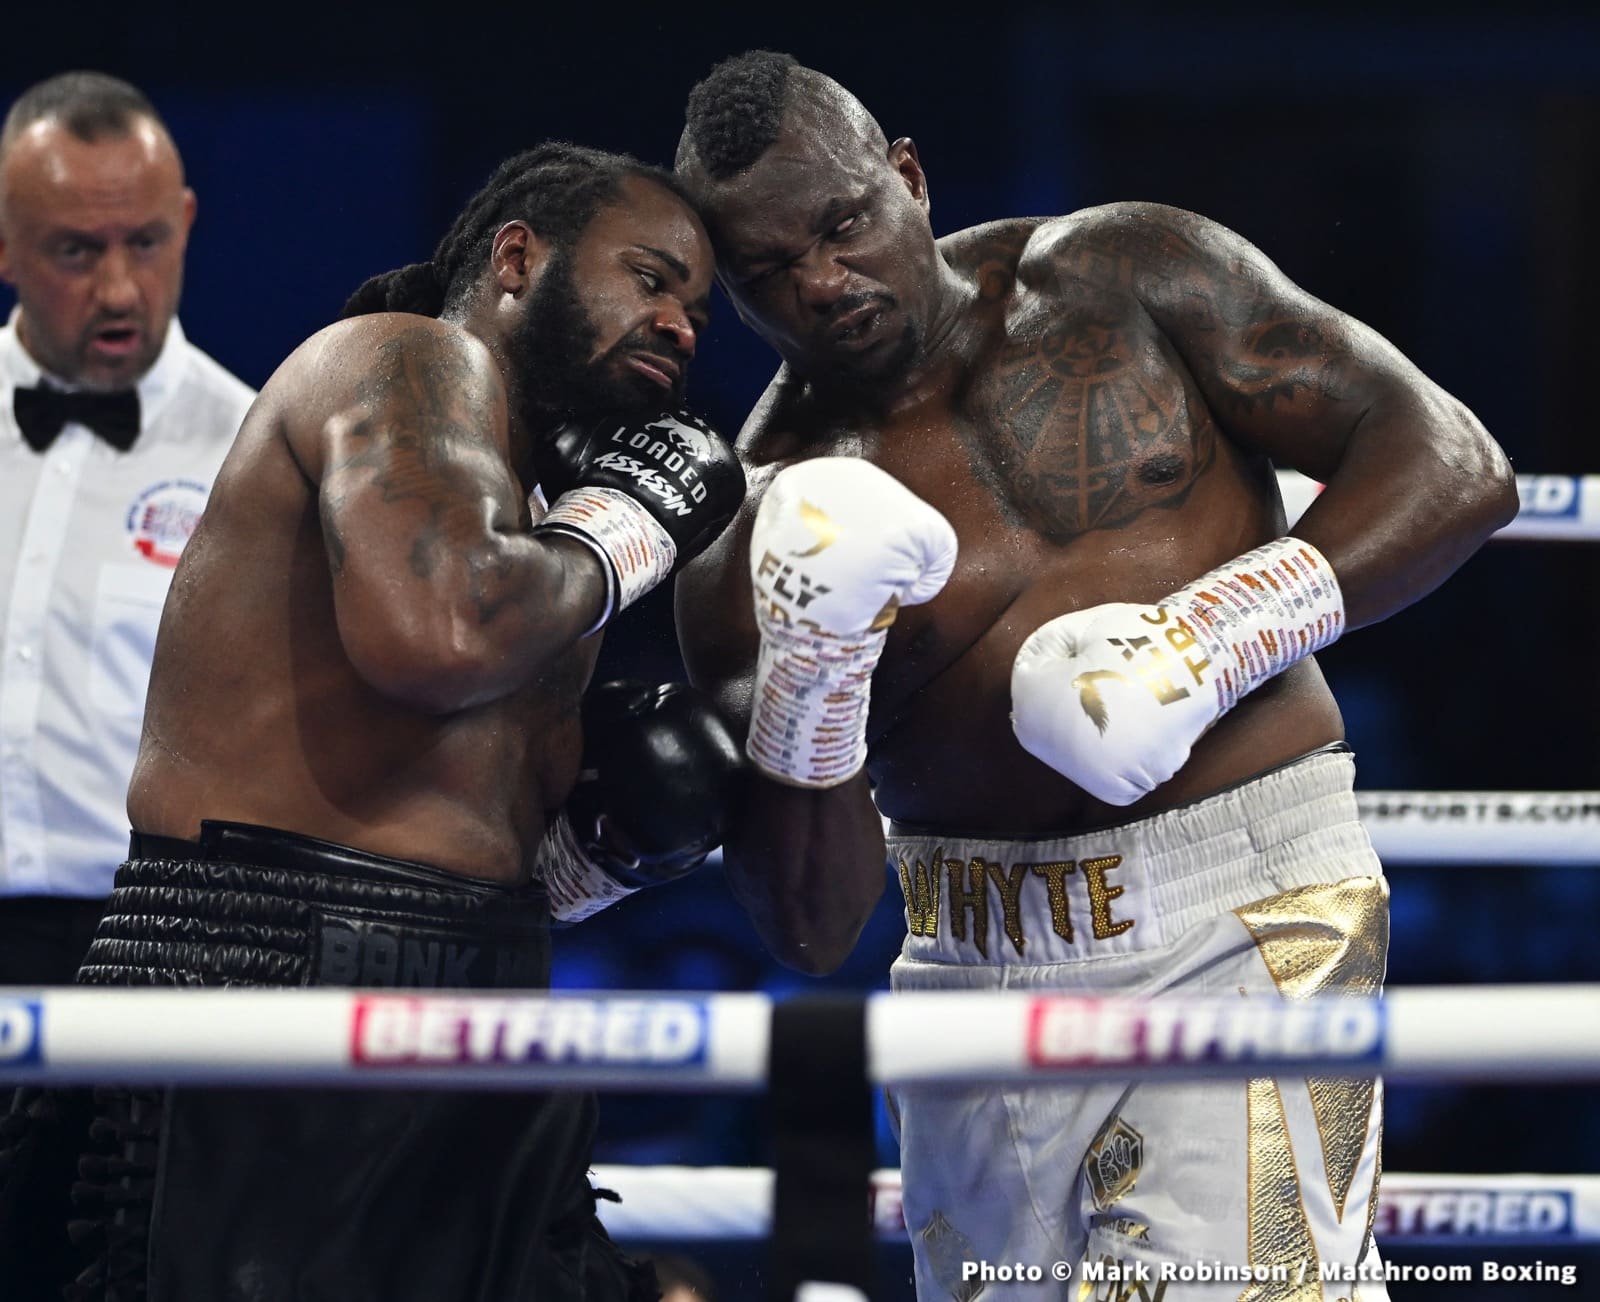 Whyte vs. Jermaine Franklin - tonight's live results from London